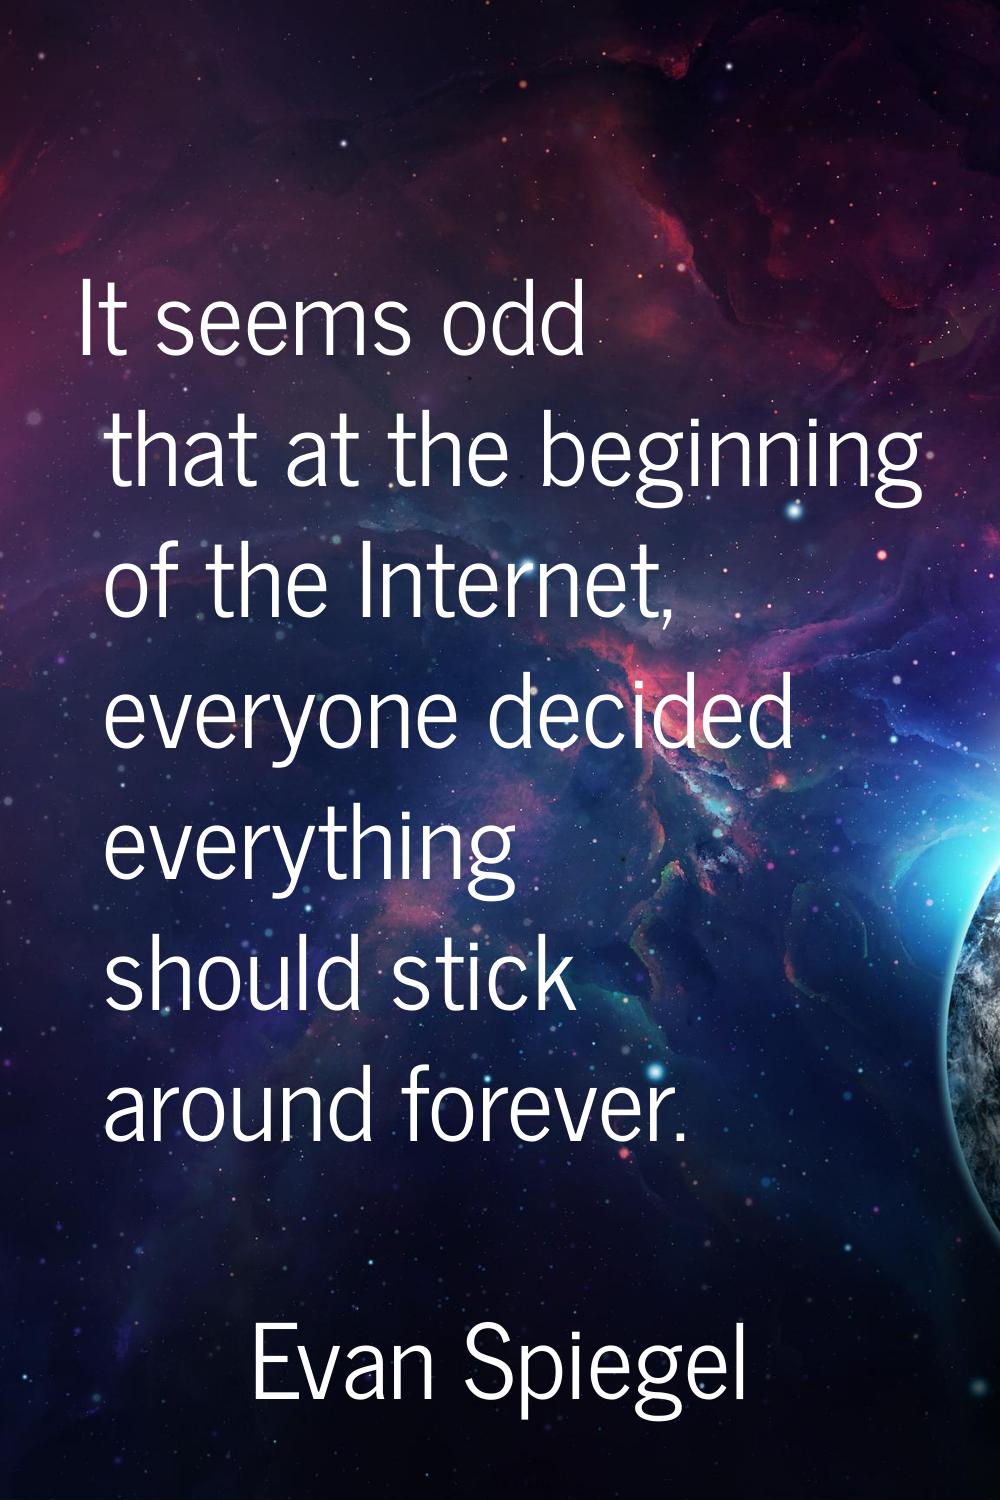 It seems odd that at the beginning of the Internet, everyone decided everything should stick around